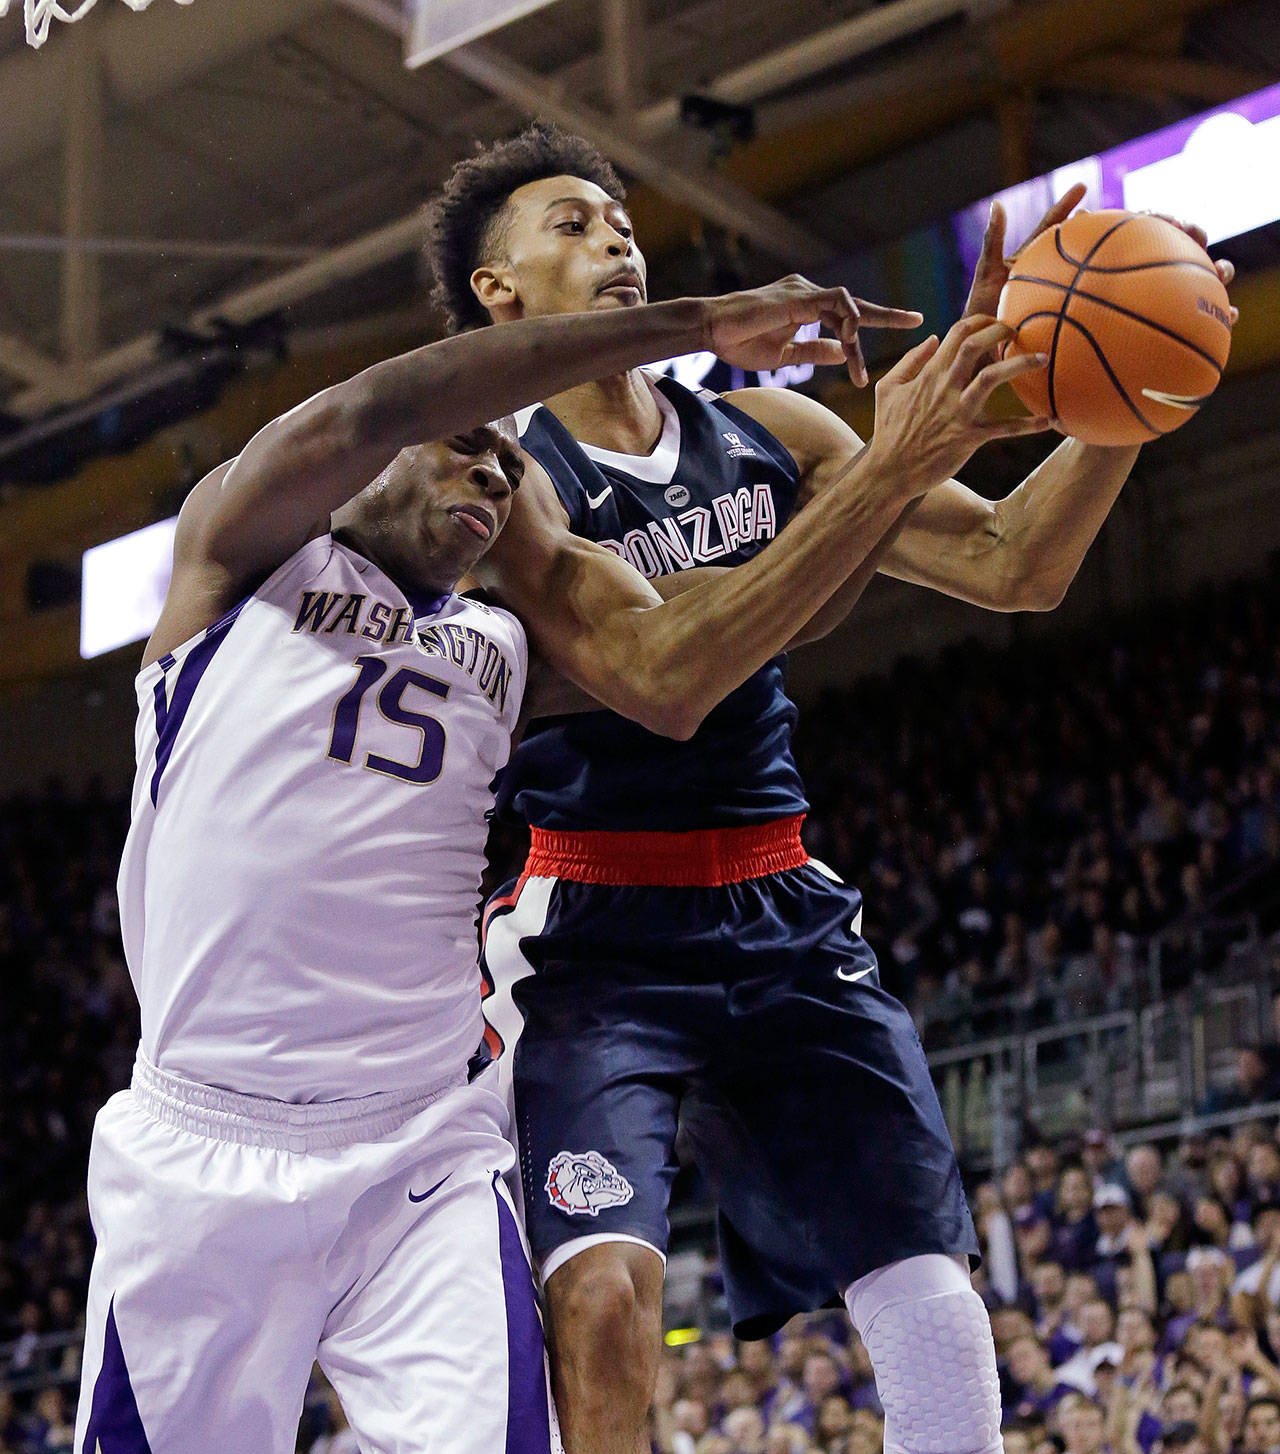 Johnathan Williams (right) grabs a rebound in front of Washington’s Noah Dickerson (15) during Sunday’s game. Williams led the Zags with 23 points. (AP Photo/Elaine Thompson)